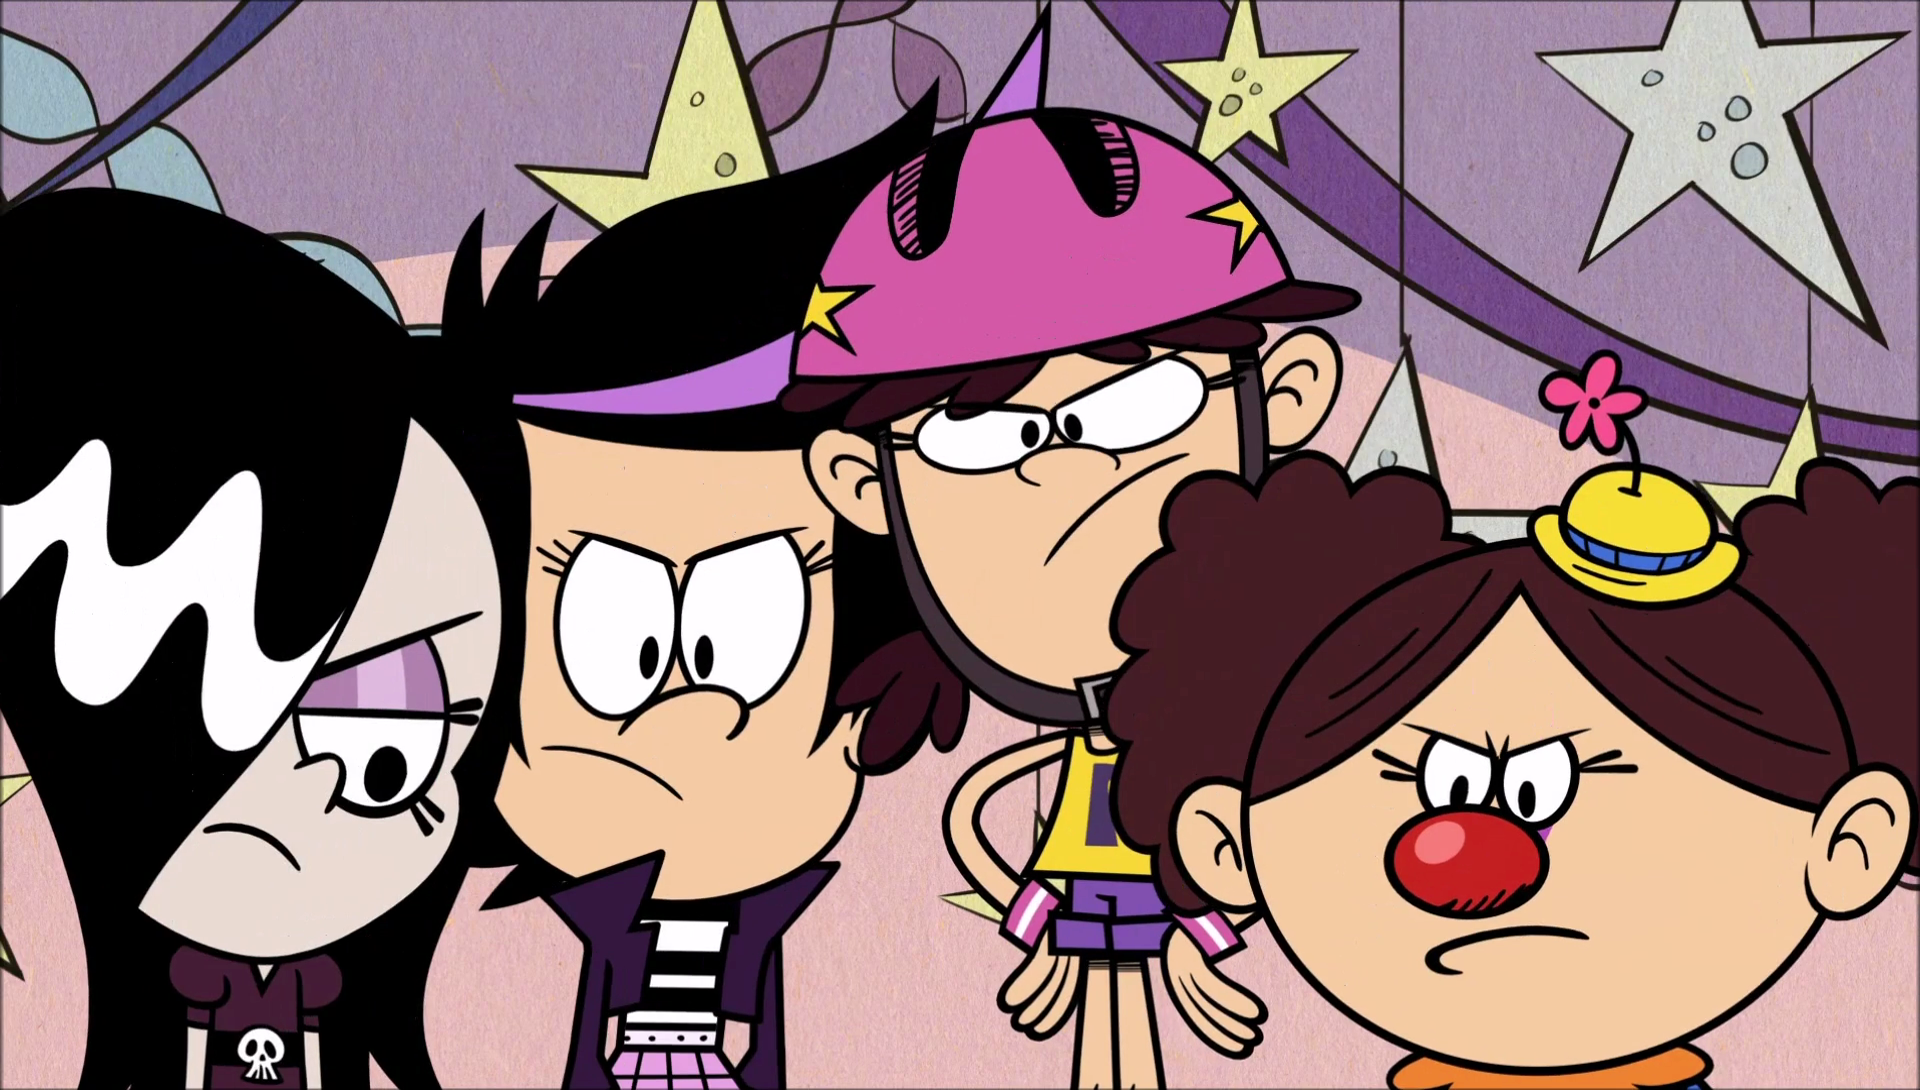 Image S1e22a The Girls Are Upsetpng The Loud House Encyclopedia Fandom Powered By Wikia 